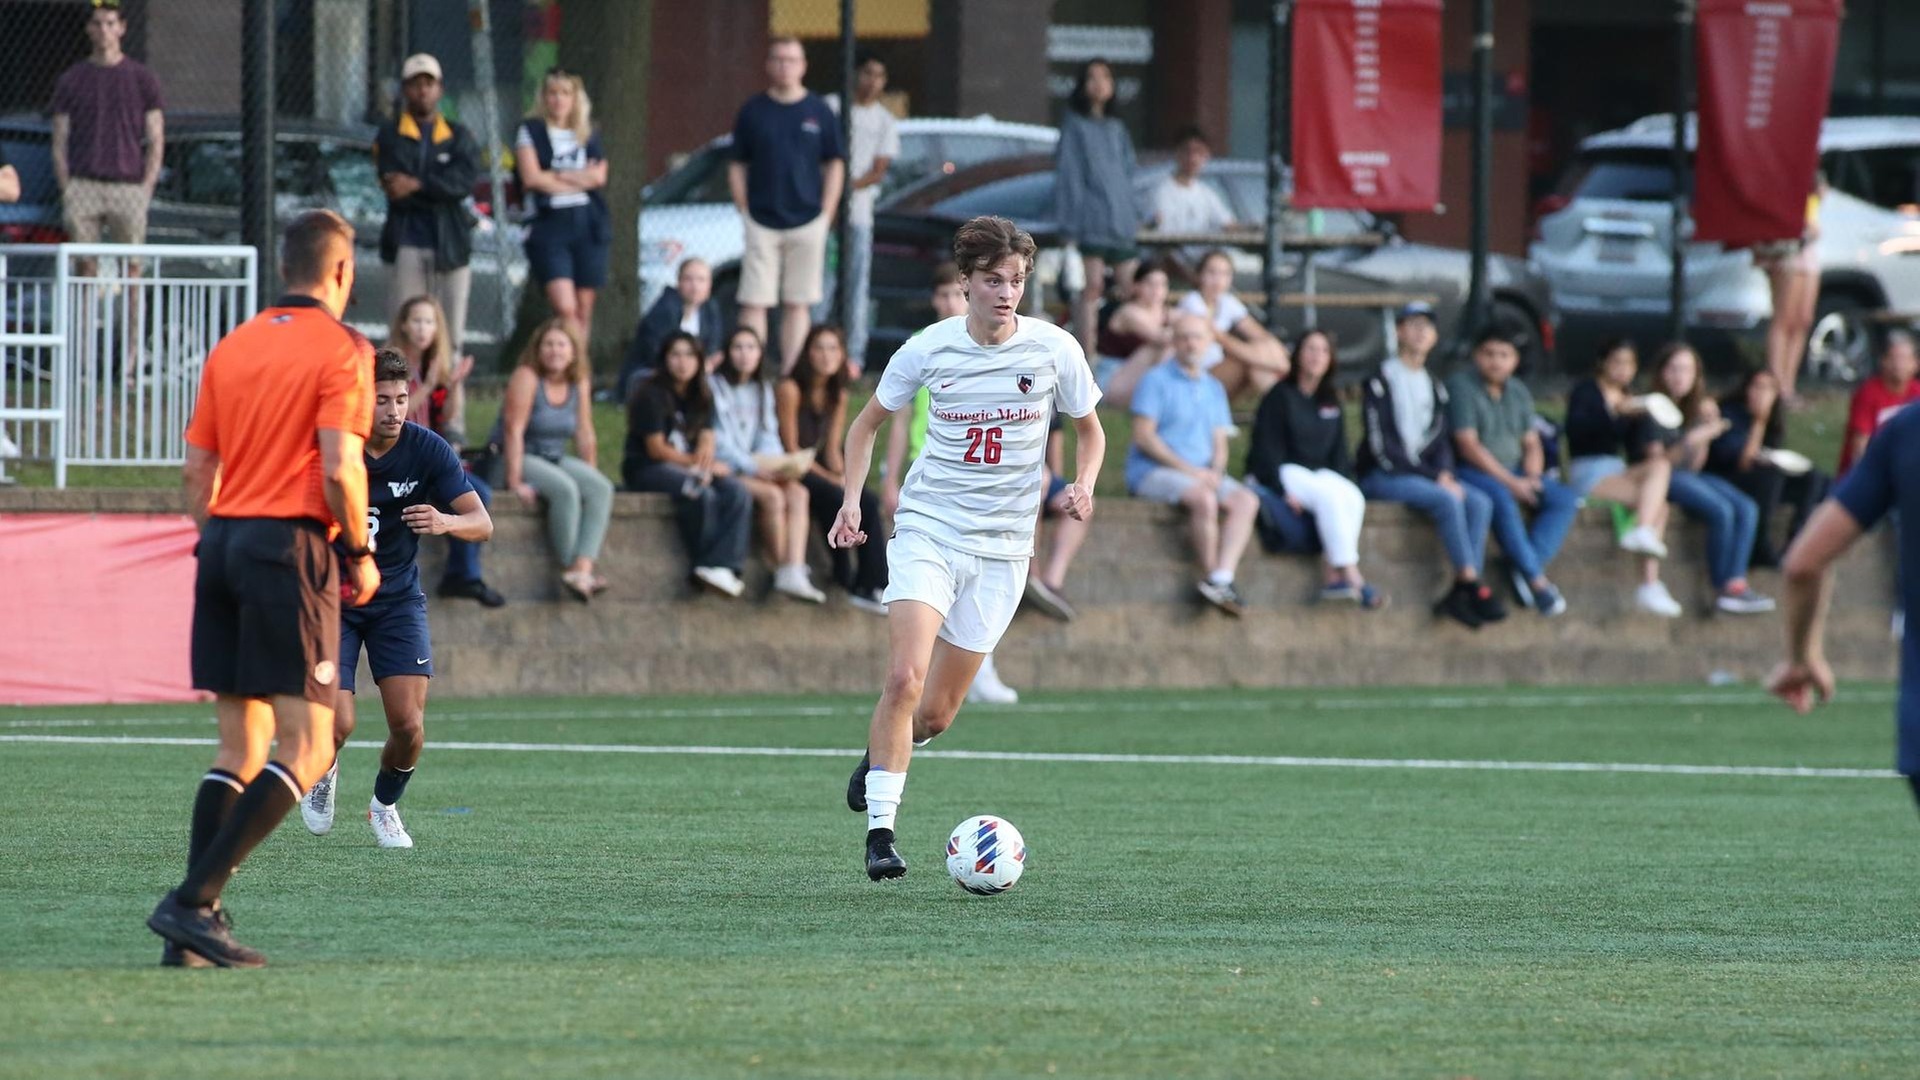 men's soccer player wearing white uniform looks up field to make a pass with a crowd of people in the background watching